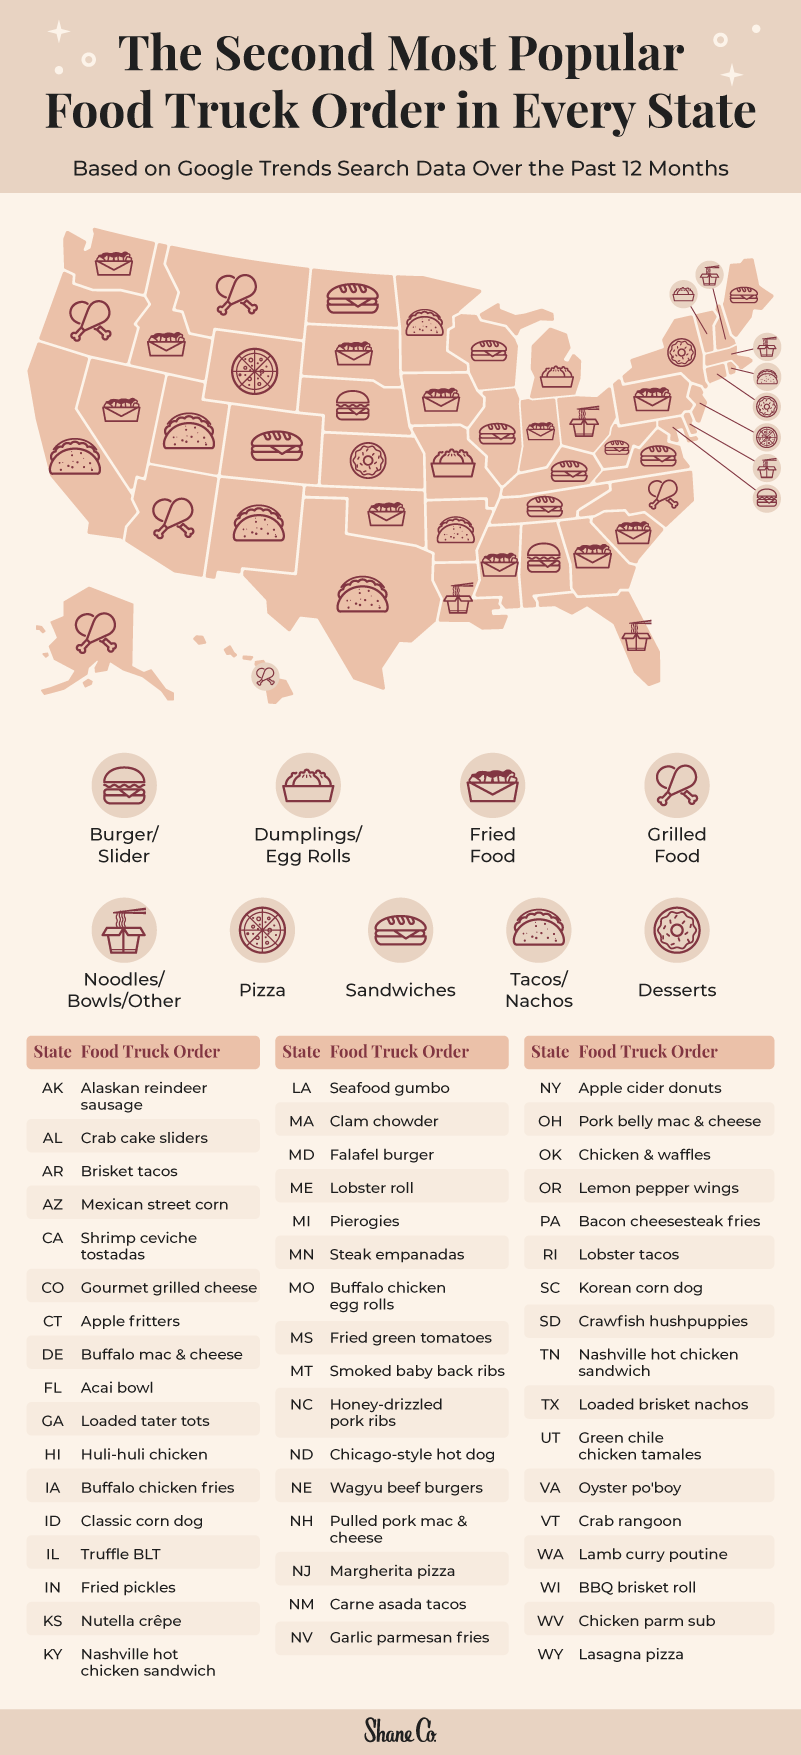 U.S map plotting the second most popular food truck order in each state